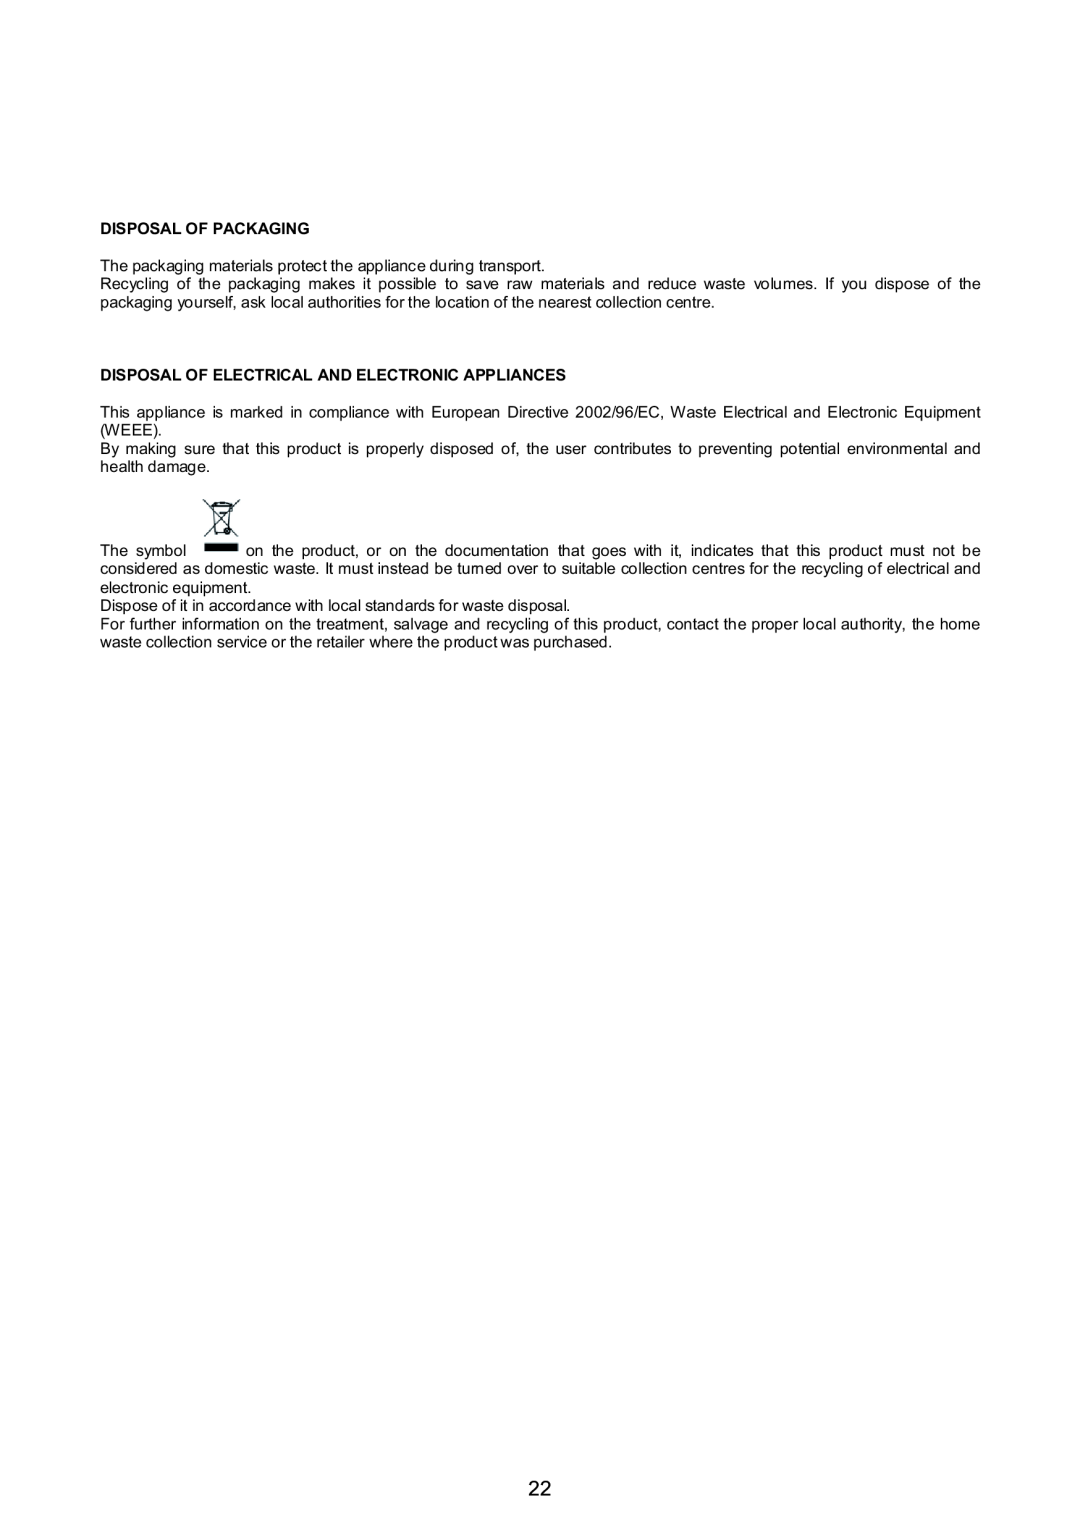 Foster cod.7138 000 user manual Disposal Of Packaging, Disposal Of Electrical And Electronic Appliances 